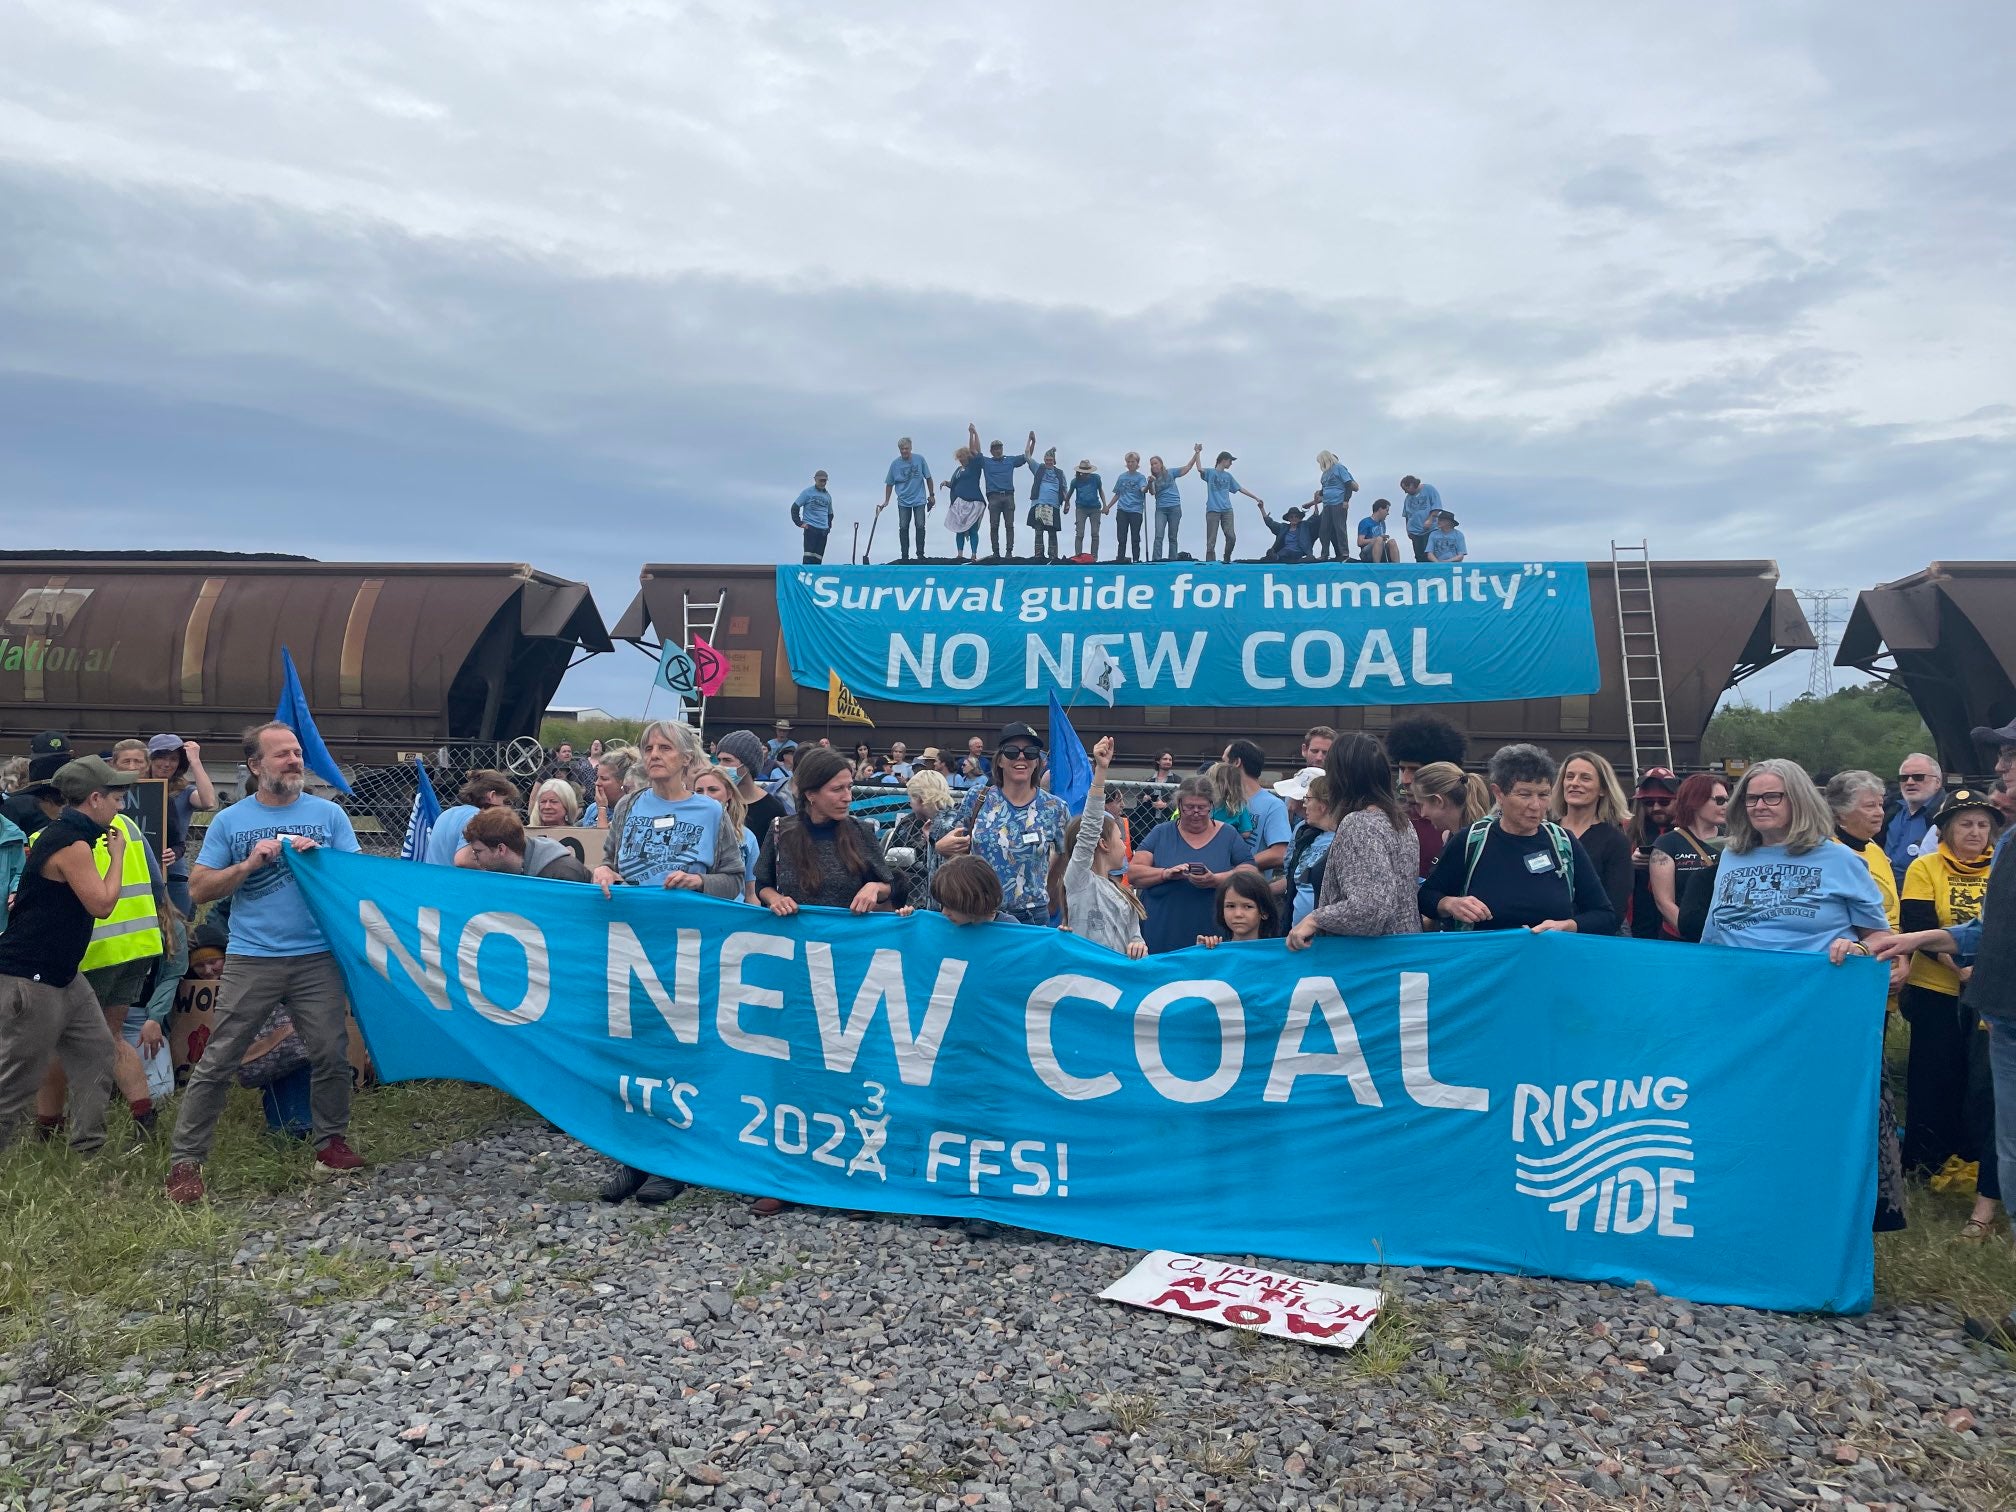 Climate activists involved in the protest halt train and shoveled coal out of its wagons